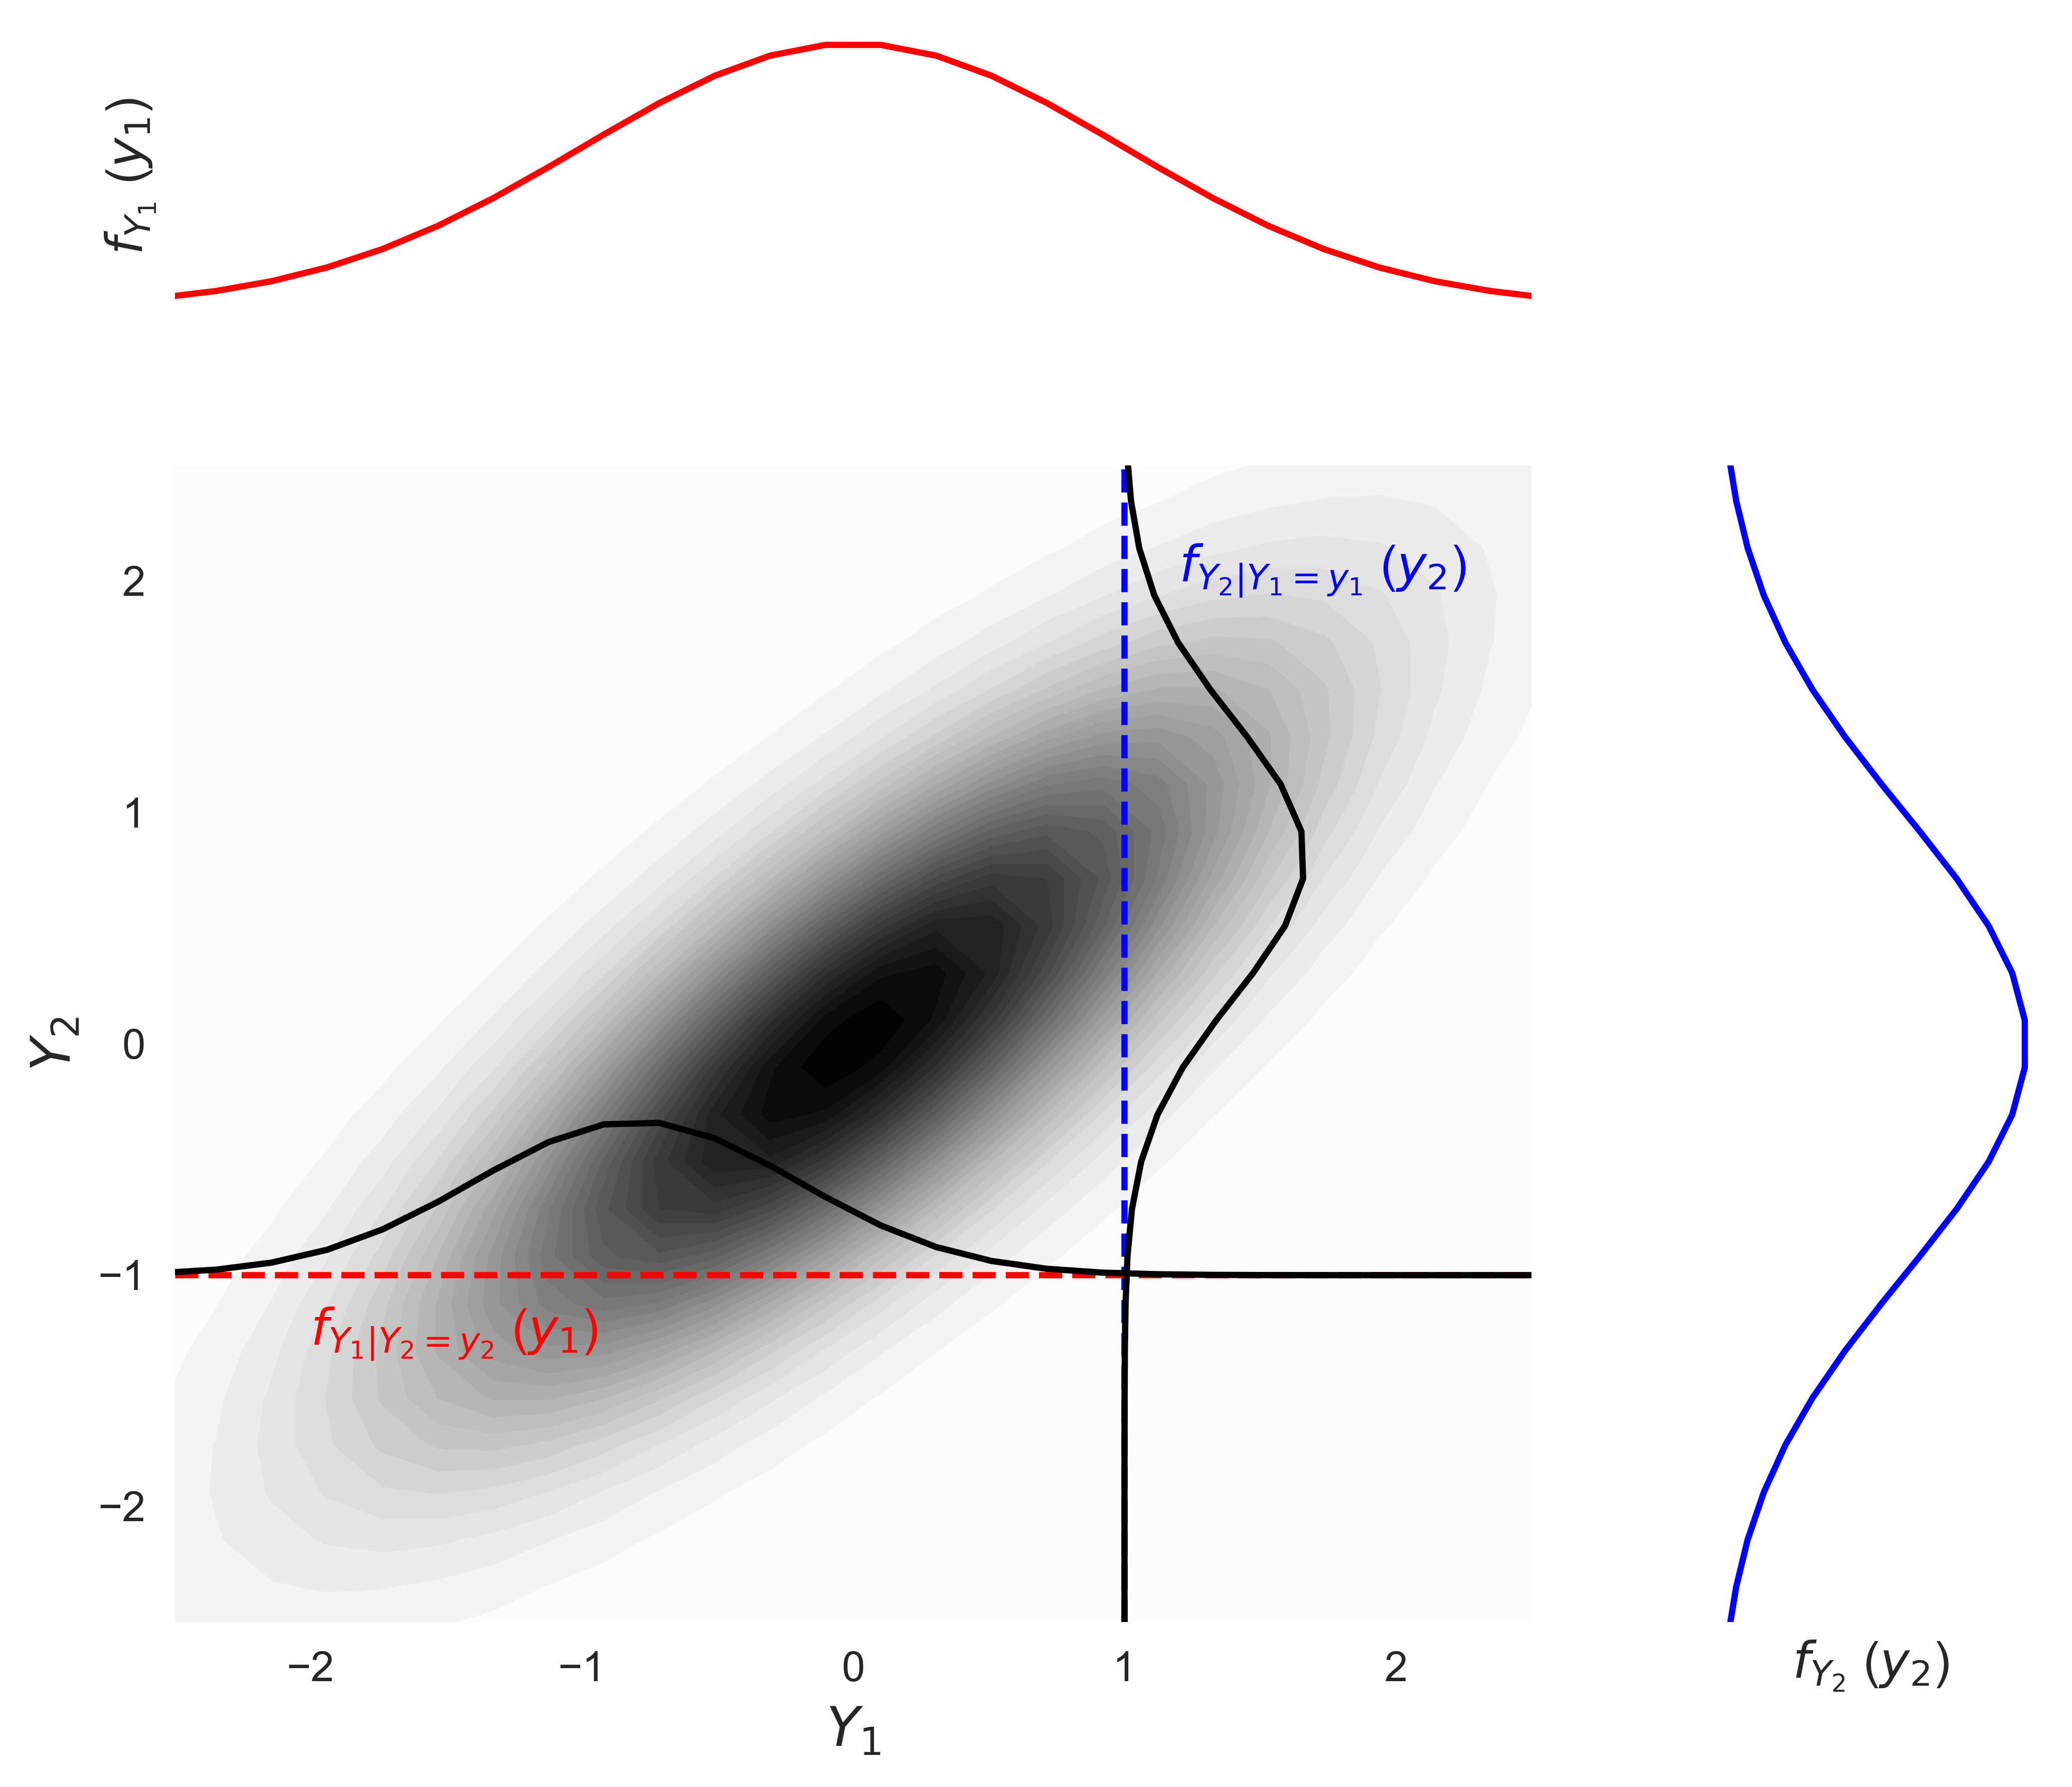 Example of bivariate Gaussian distribution showing Y_1 and Y_2 marginal distributions. The figure also illustrates the normality of the conditional distributions.